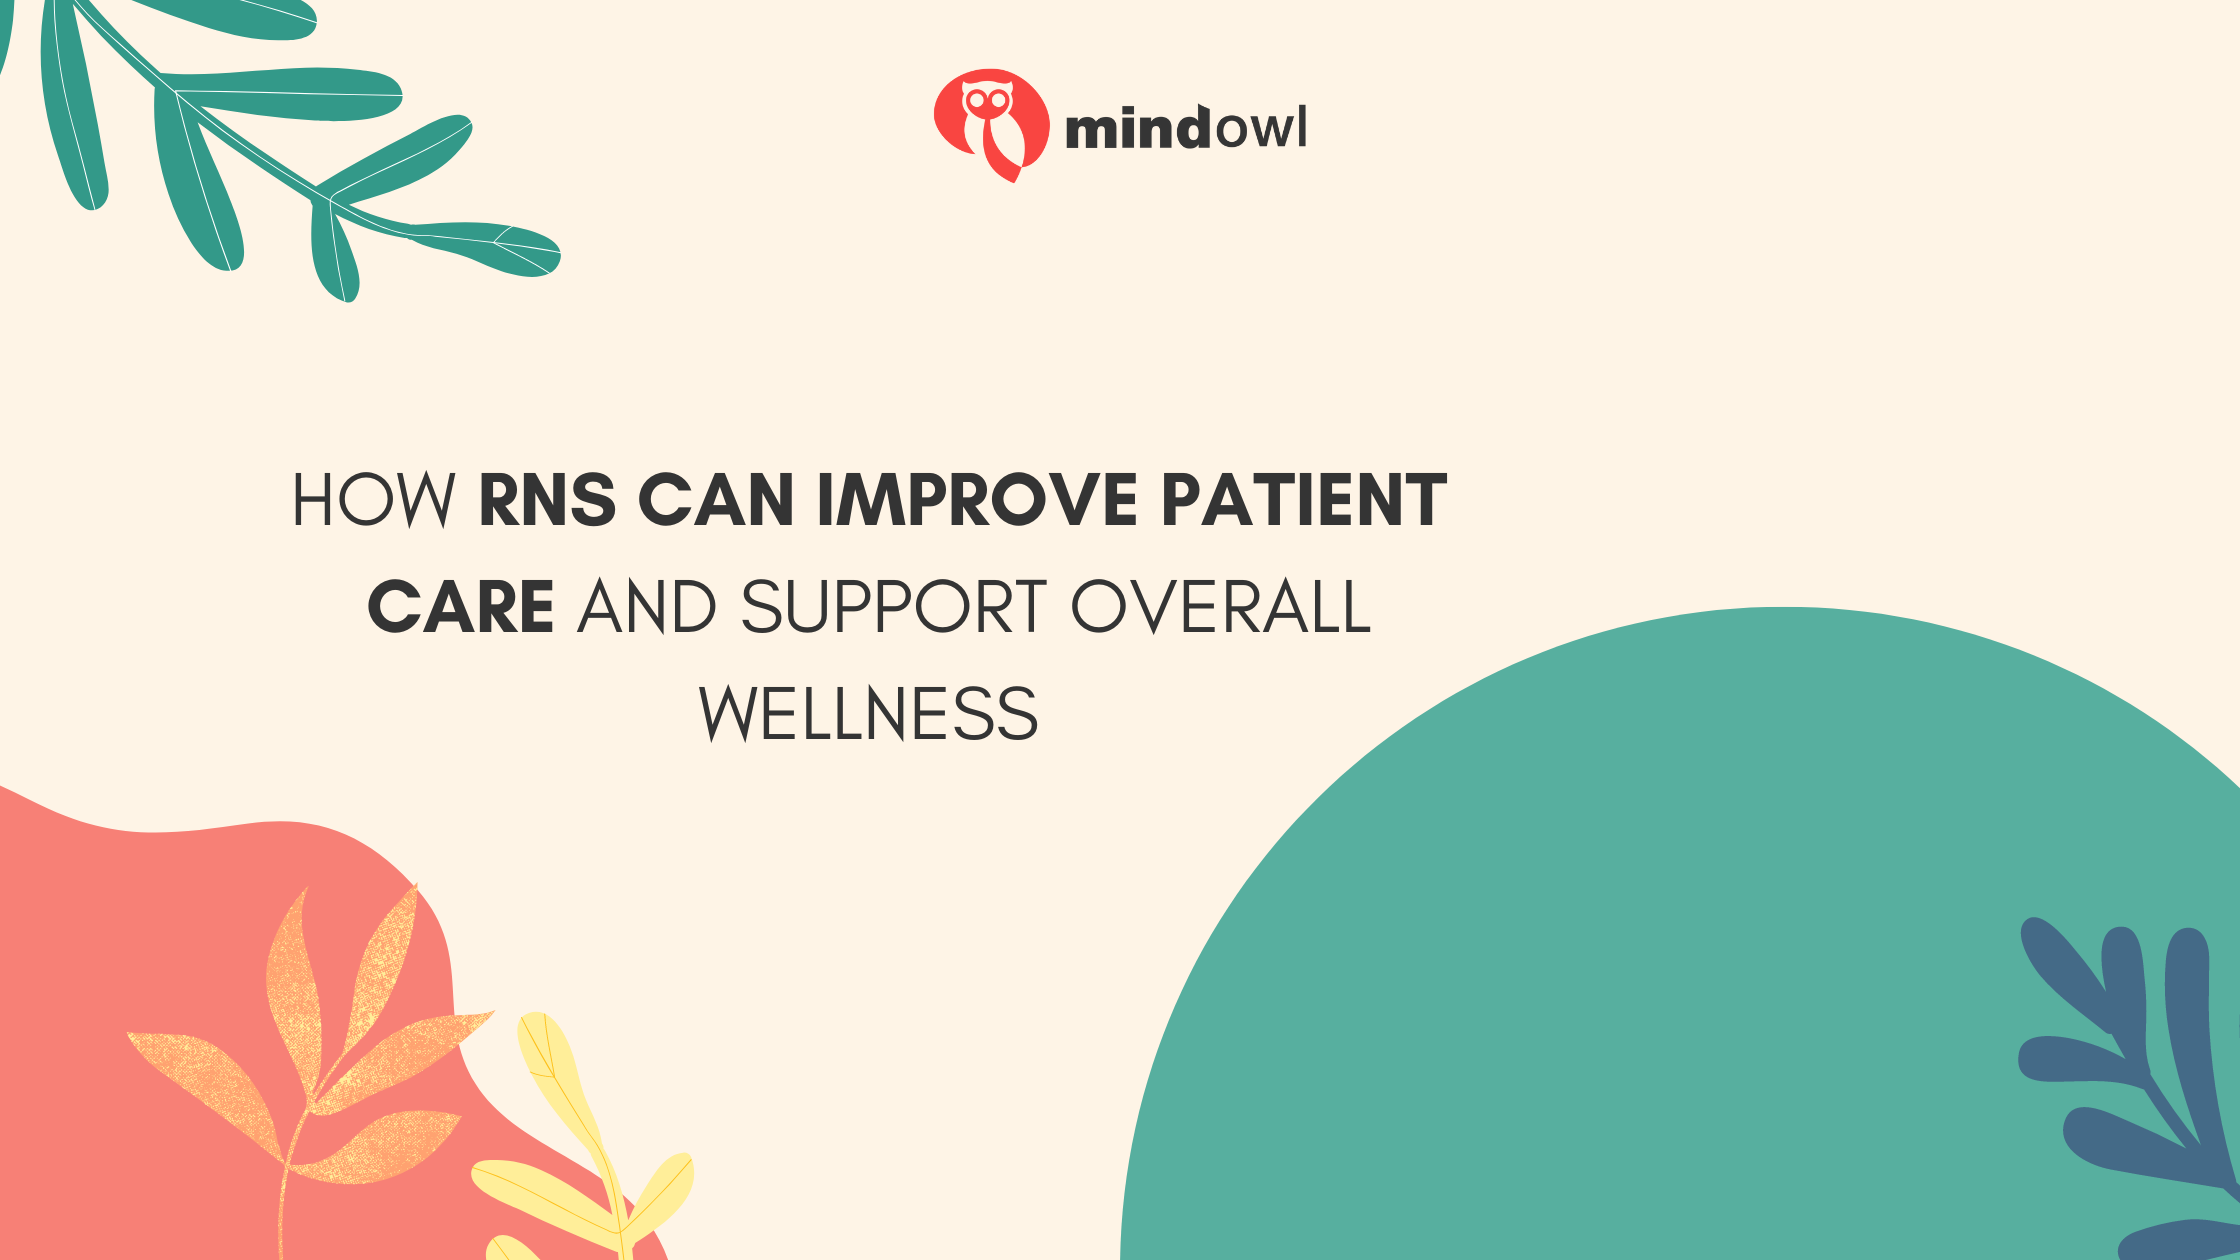 How RNs Can Improve Patient Care and Support Overall Wellness